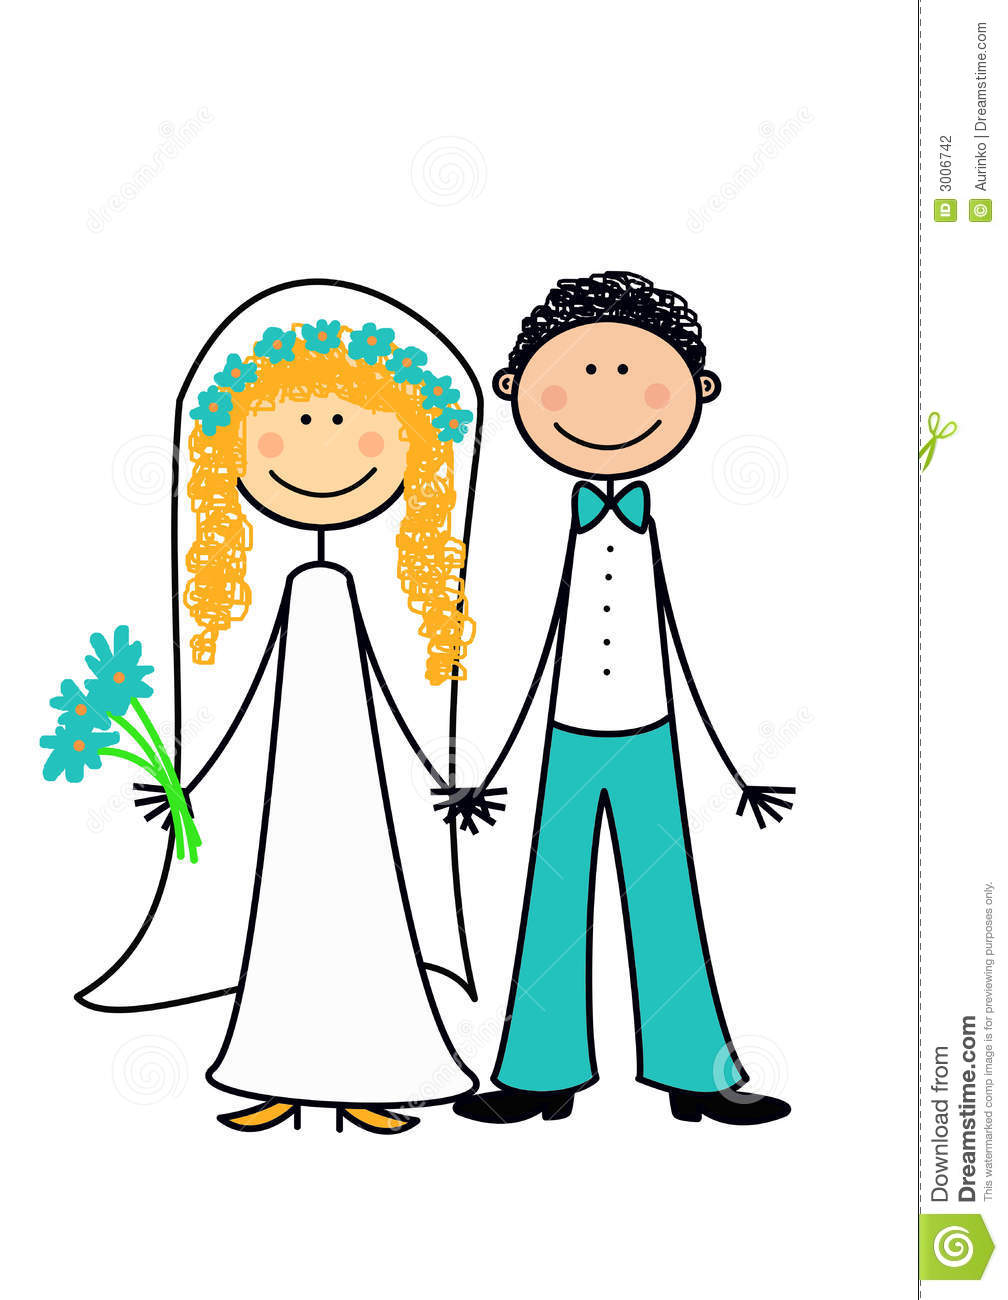 Married couple clipart - .